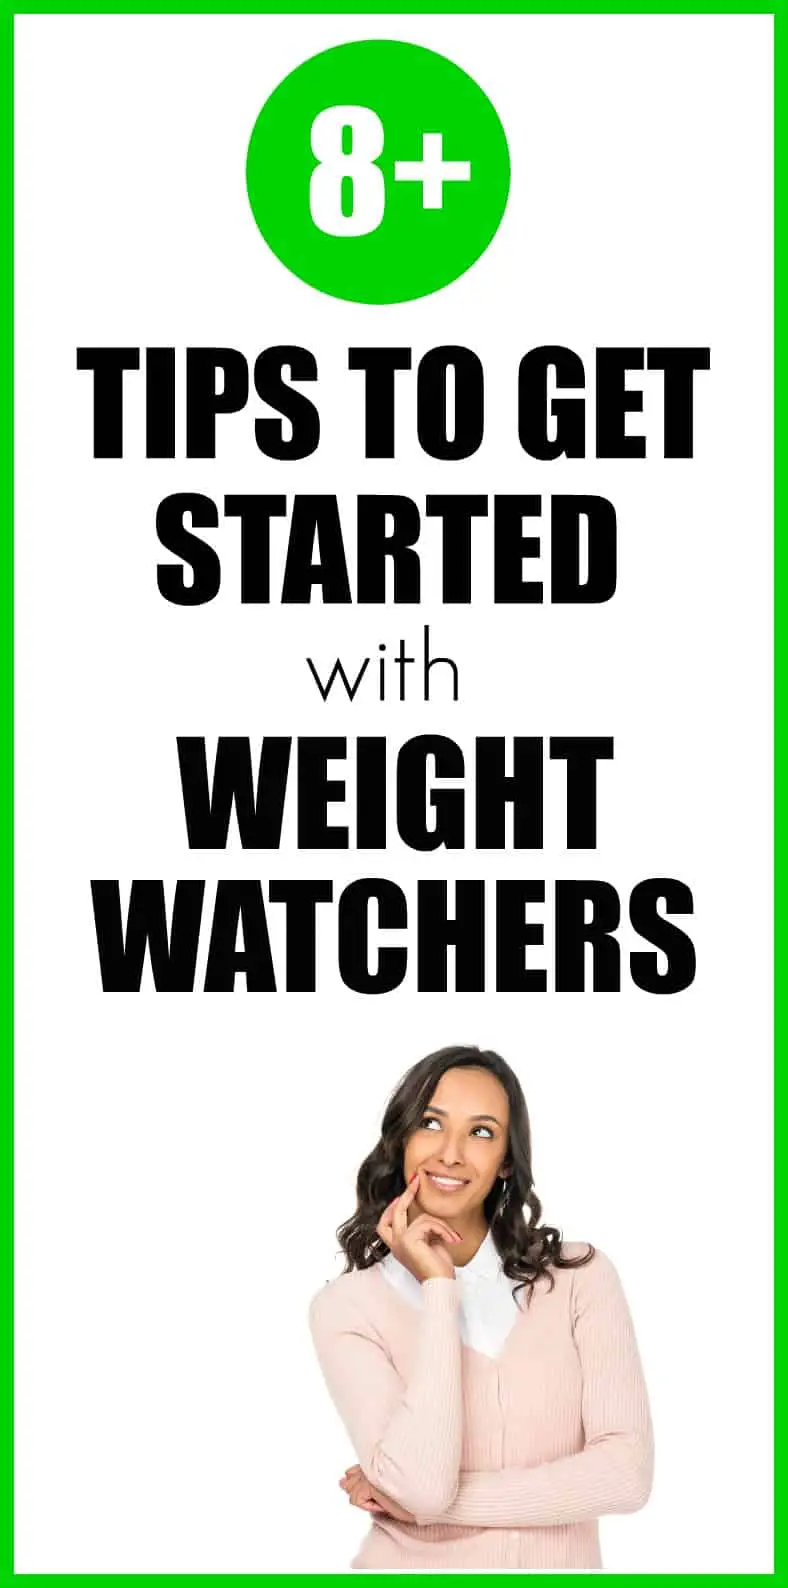 Tips to Get Started With Weight Watchers. #WW #WeightWatchers